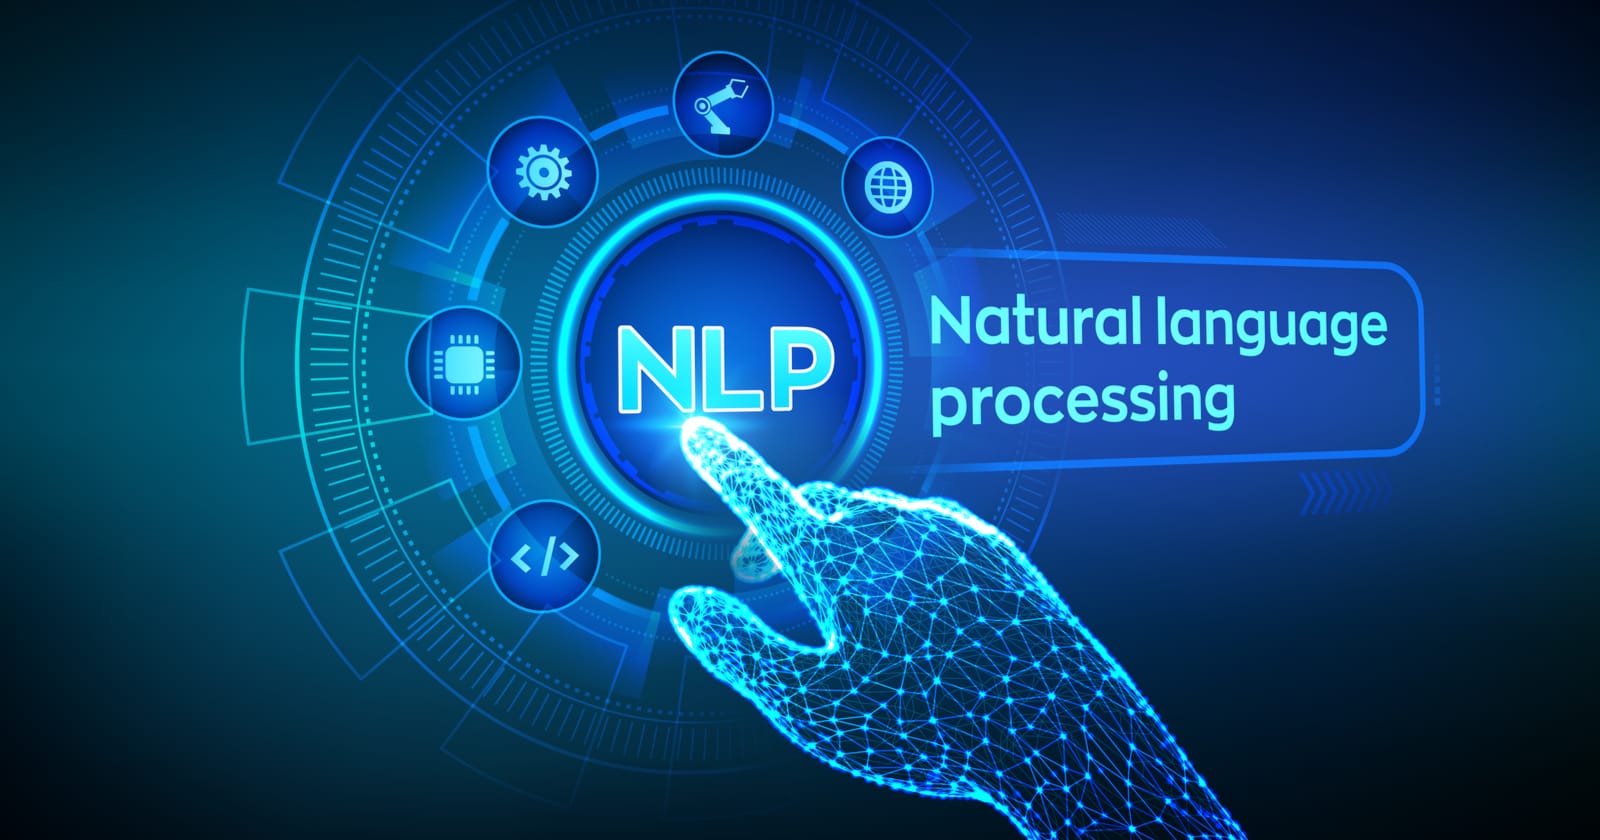 What is Natural Language Processing